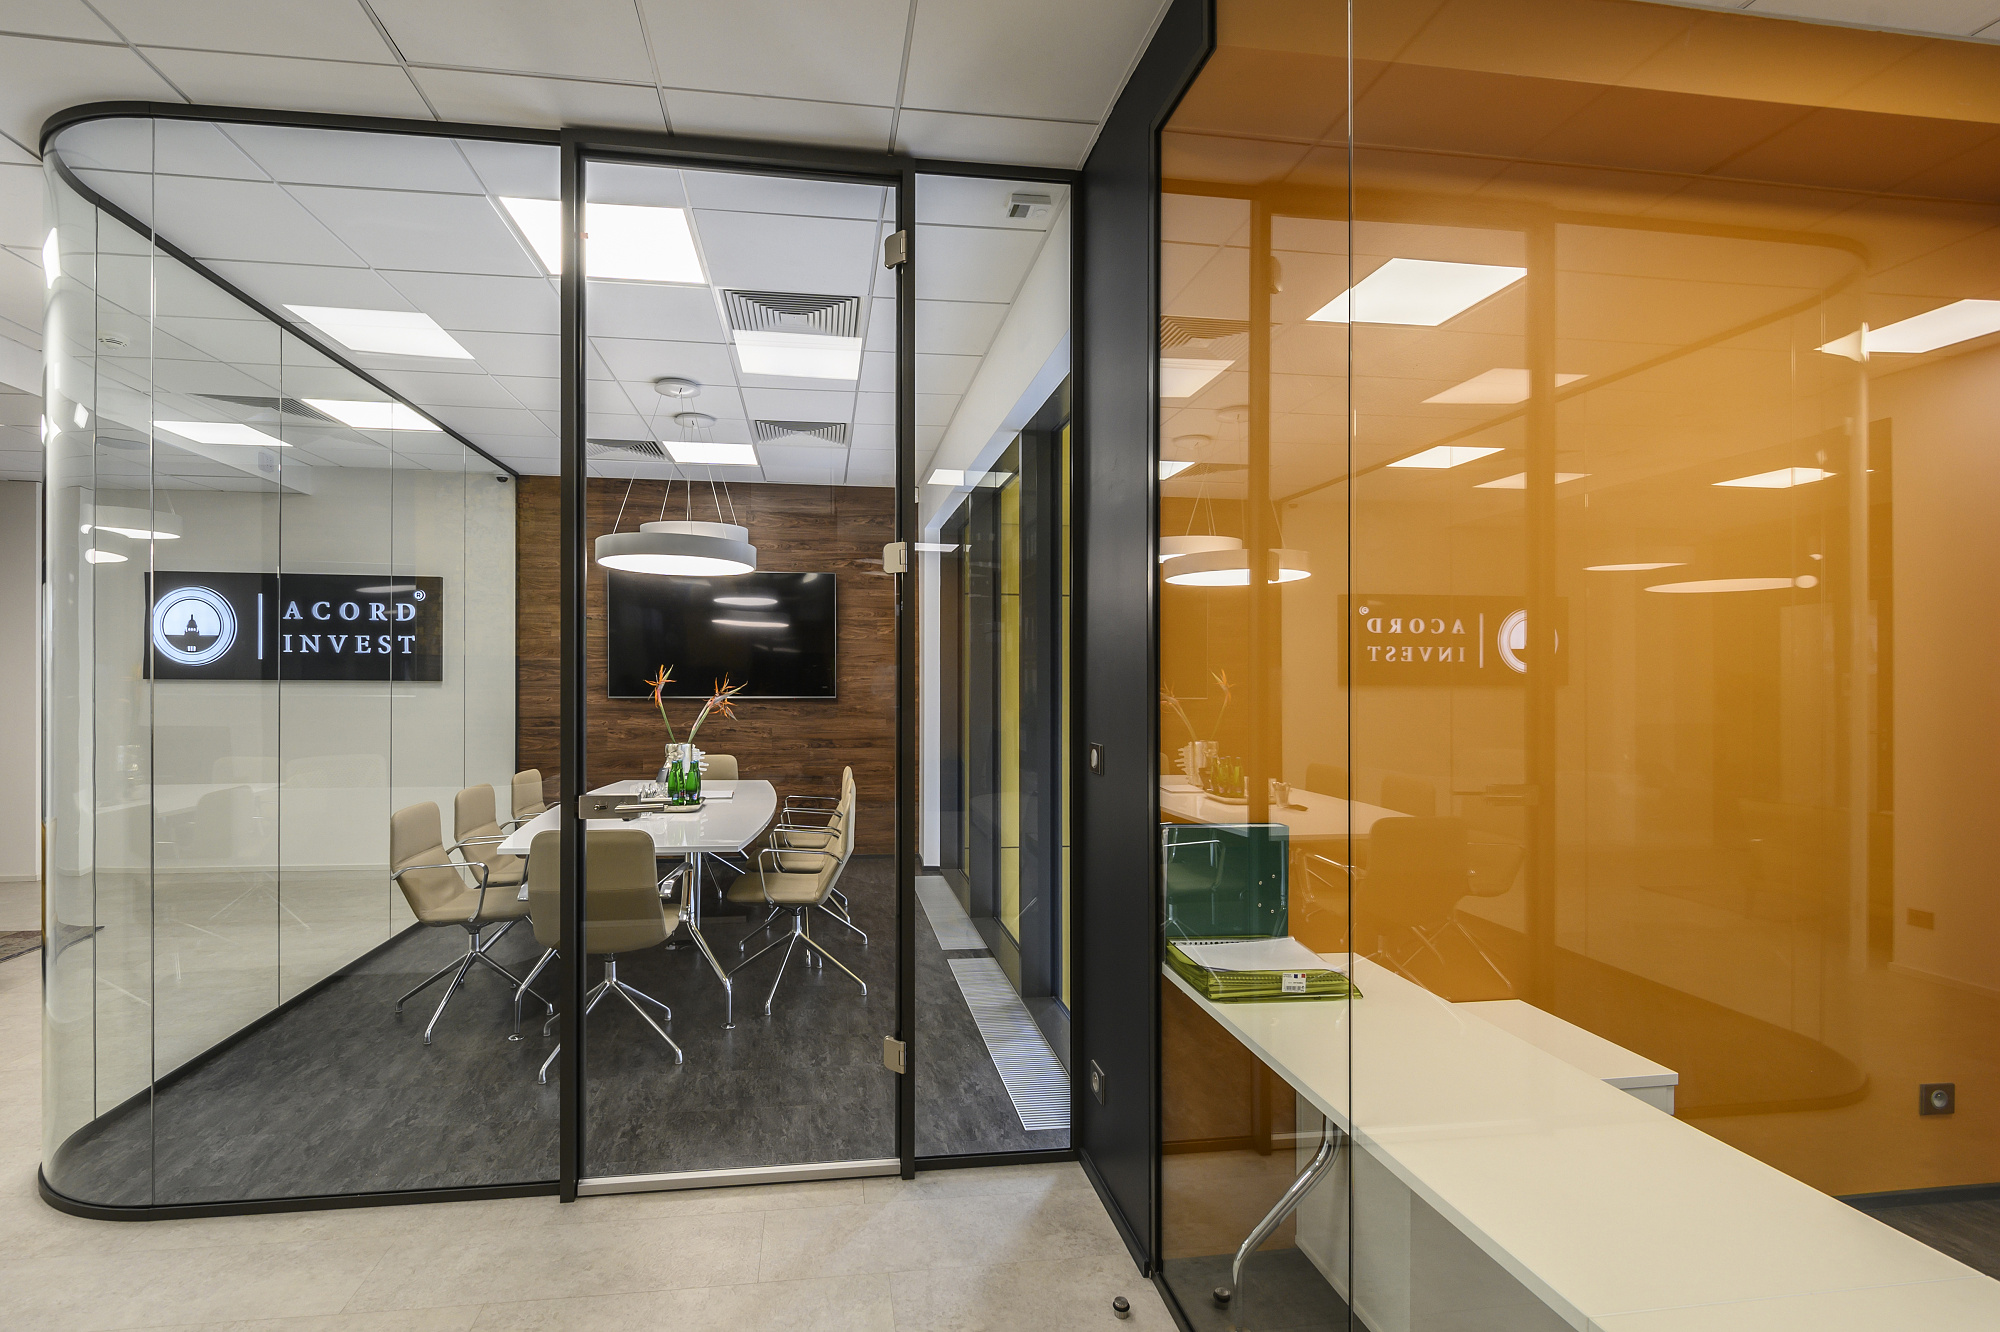 Curved glass partitions livens up the interior